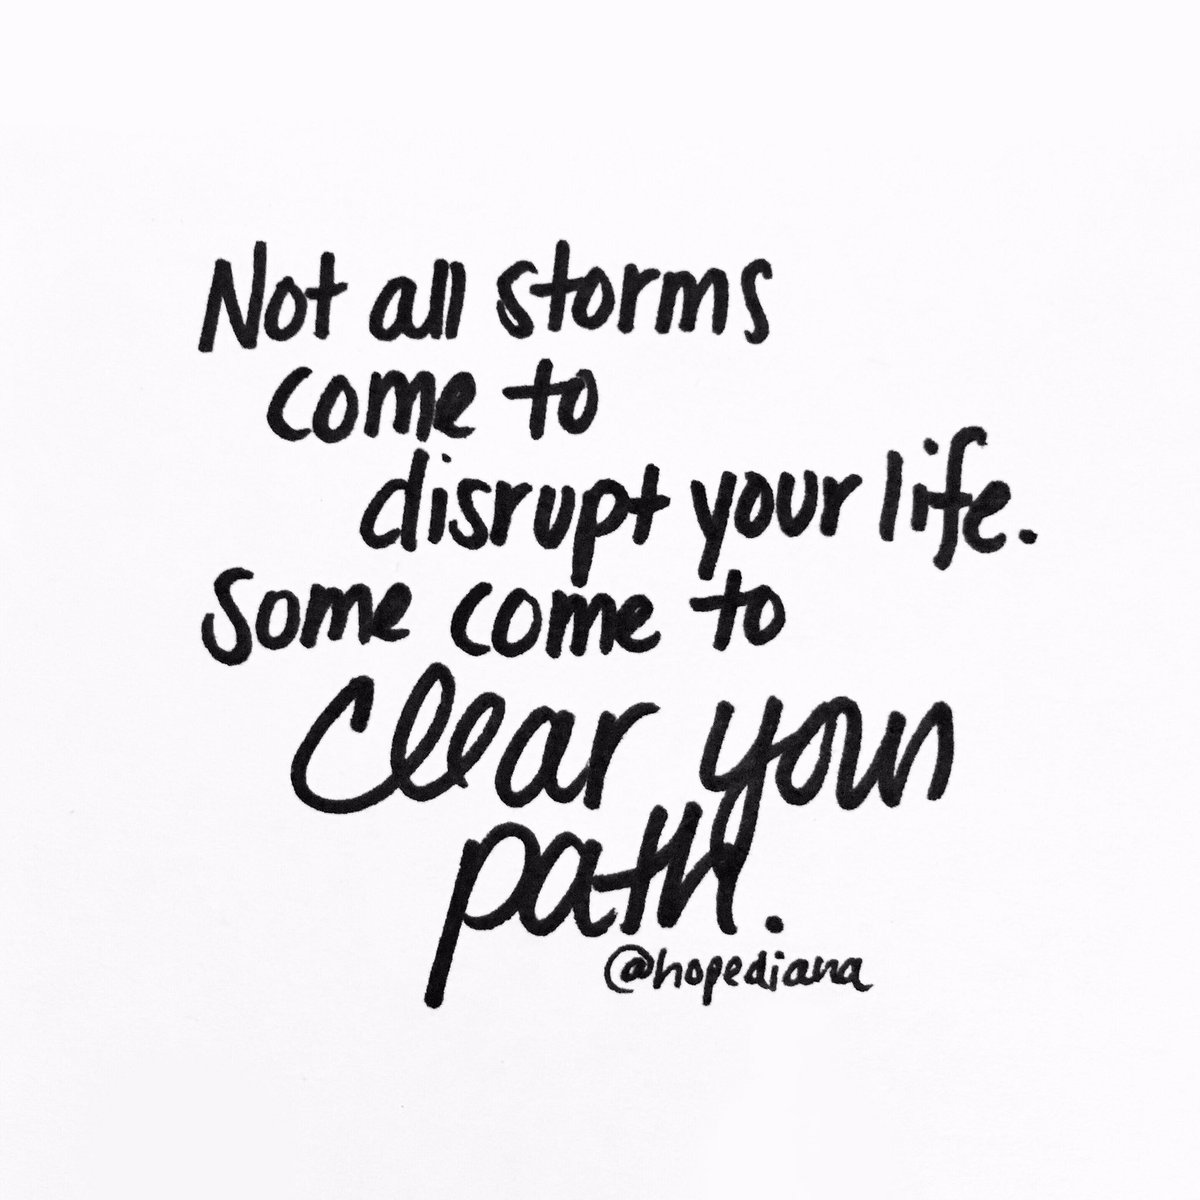 Today, I’m thankful for that storm.
▫️🖤▫️
#fridayfeels #trustyourpath #itallworksoutintheend #quoteoftheday